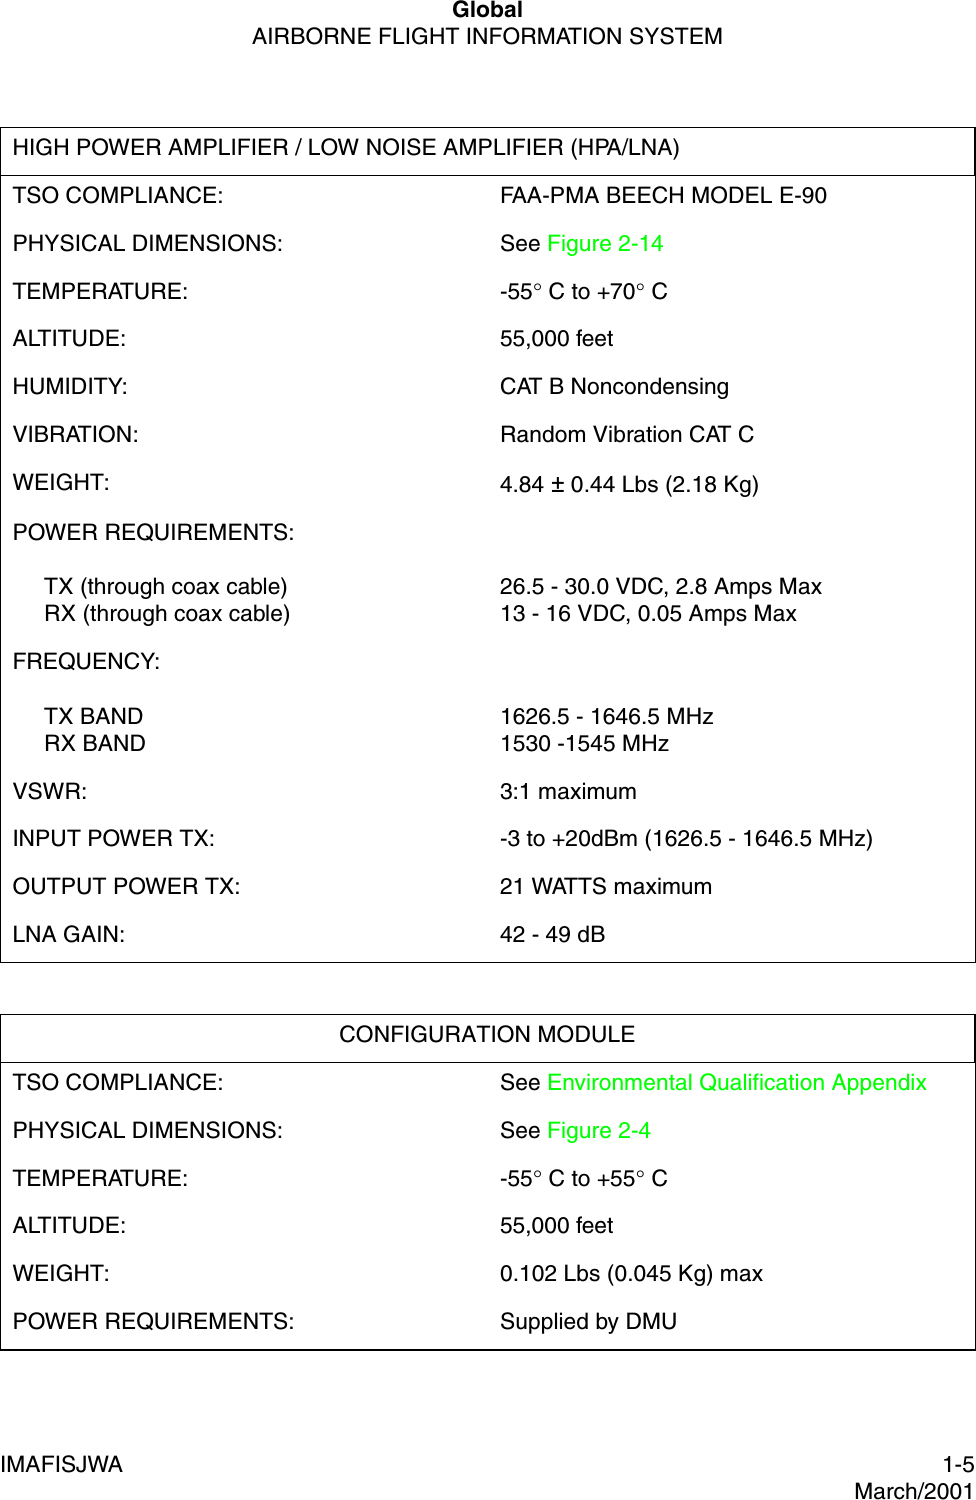 GlobalAIRBORNE FLIGHT INFORMATION SYSTEMIMAFISJWA 1-5March/2001HIGH POWER AMPLIFIER / LOW NOISE AMPLIFIER (HPA/LNA)TSO COMPLIANCE: FAA-PMA BEECH MODEL E-90PHYSICAL DIMENSIONS: See Figure 2-14TEMPERATURE: -55° C to +70° CALTITUDE: 55,000 feetHUMIDITY: CAT B NoncondensingVIBRATION: Random Vibration CAT CWEIGHT: 4.84 ± 0.44 Lbs (2.18 Kg)POWER REQUIREMENTS:     TX (through coax cable)     RX (through coax cable)26.5 - 30.0 VDC, 2.8 Amps Max13 - 16 VDC, 0.05 Amps MaxFREQUENCY:     TX BAND     RX BAND1626.5 - 1646.5 MHz1530 -1545 MHzVSWR: 3:1 maximumINPUT POWER TX: -3 to +20dBm (1626.5 - 1646.5 MHz)OUTPUT POWER TX: 21 WATTS maximumLNA GAIN: 42 - 49 dBCONFIGURATION MODULETSO COMPLIANCE: See Environmental Qualification AppendixPHYSICAL DIMENSIONS: See Figure 2-4TEMPERATURE: -55° C to +55° CALTITUDE: 55,000 feetWEIGHT: 0.102 Lbs (0.045 Kg) maxPOWER REQUIREMENTS: Supplied by DMU